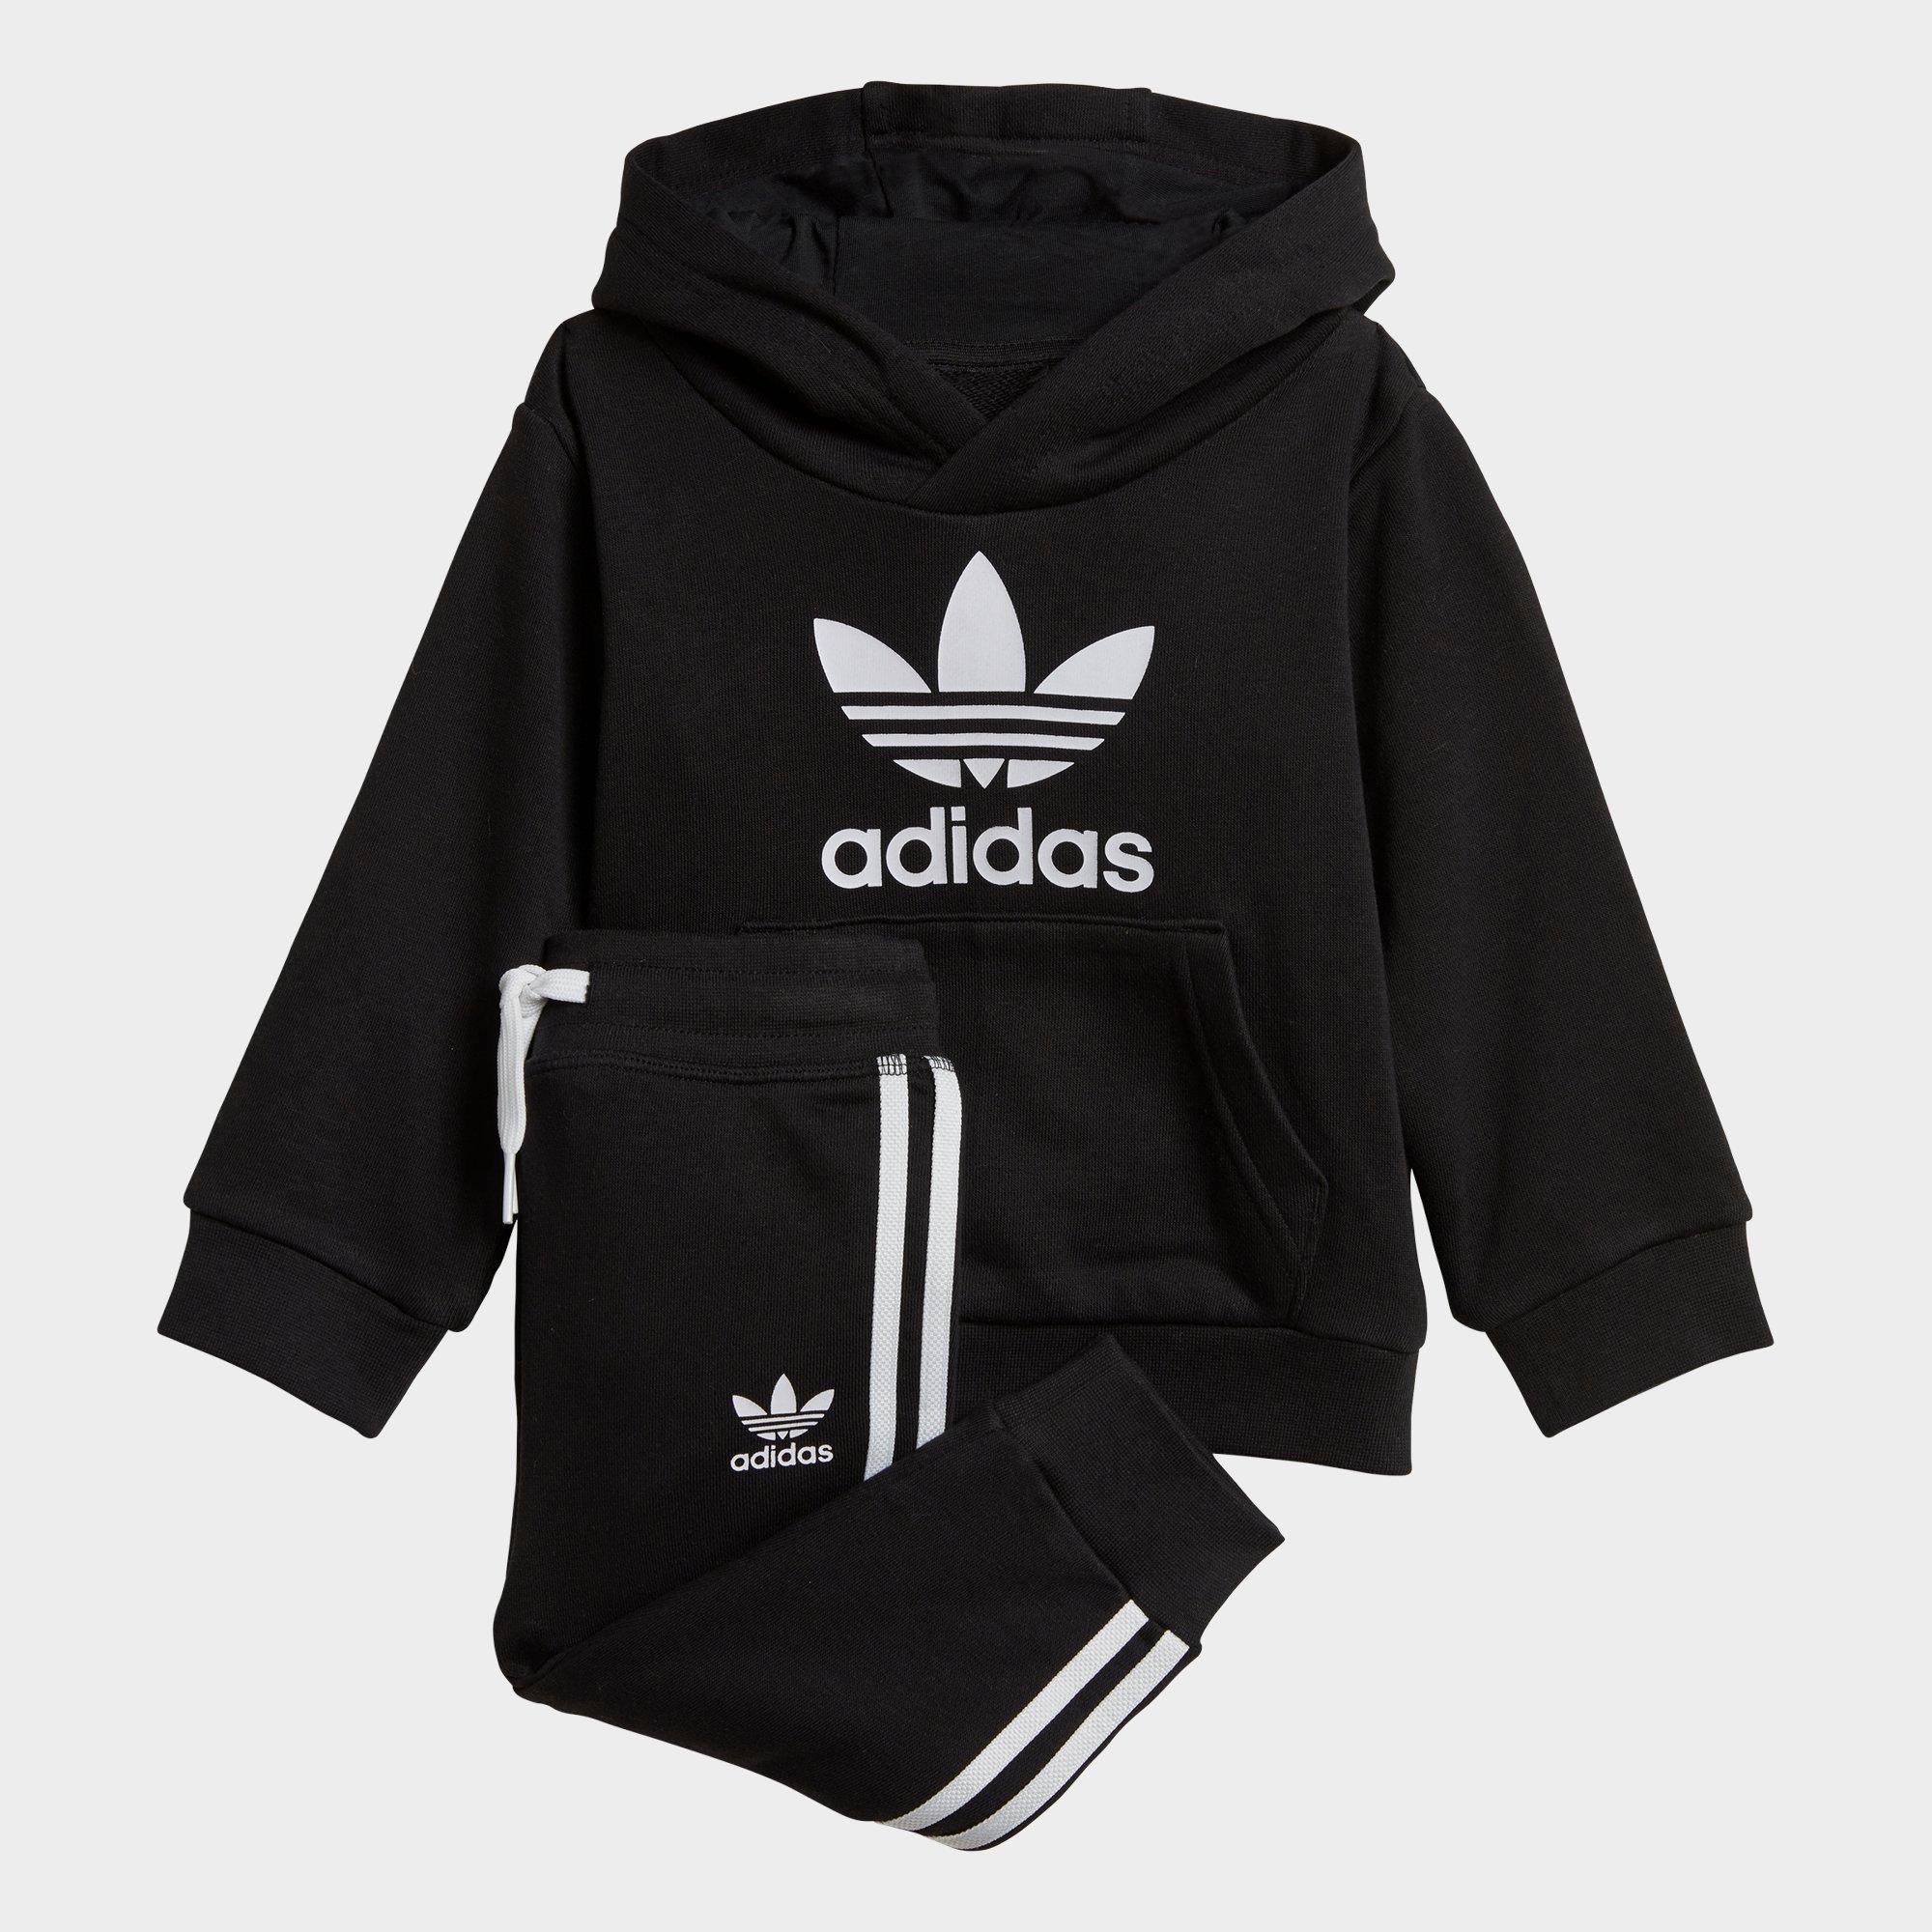 3t adidas outfit